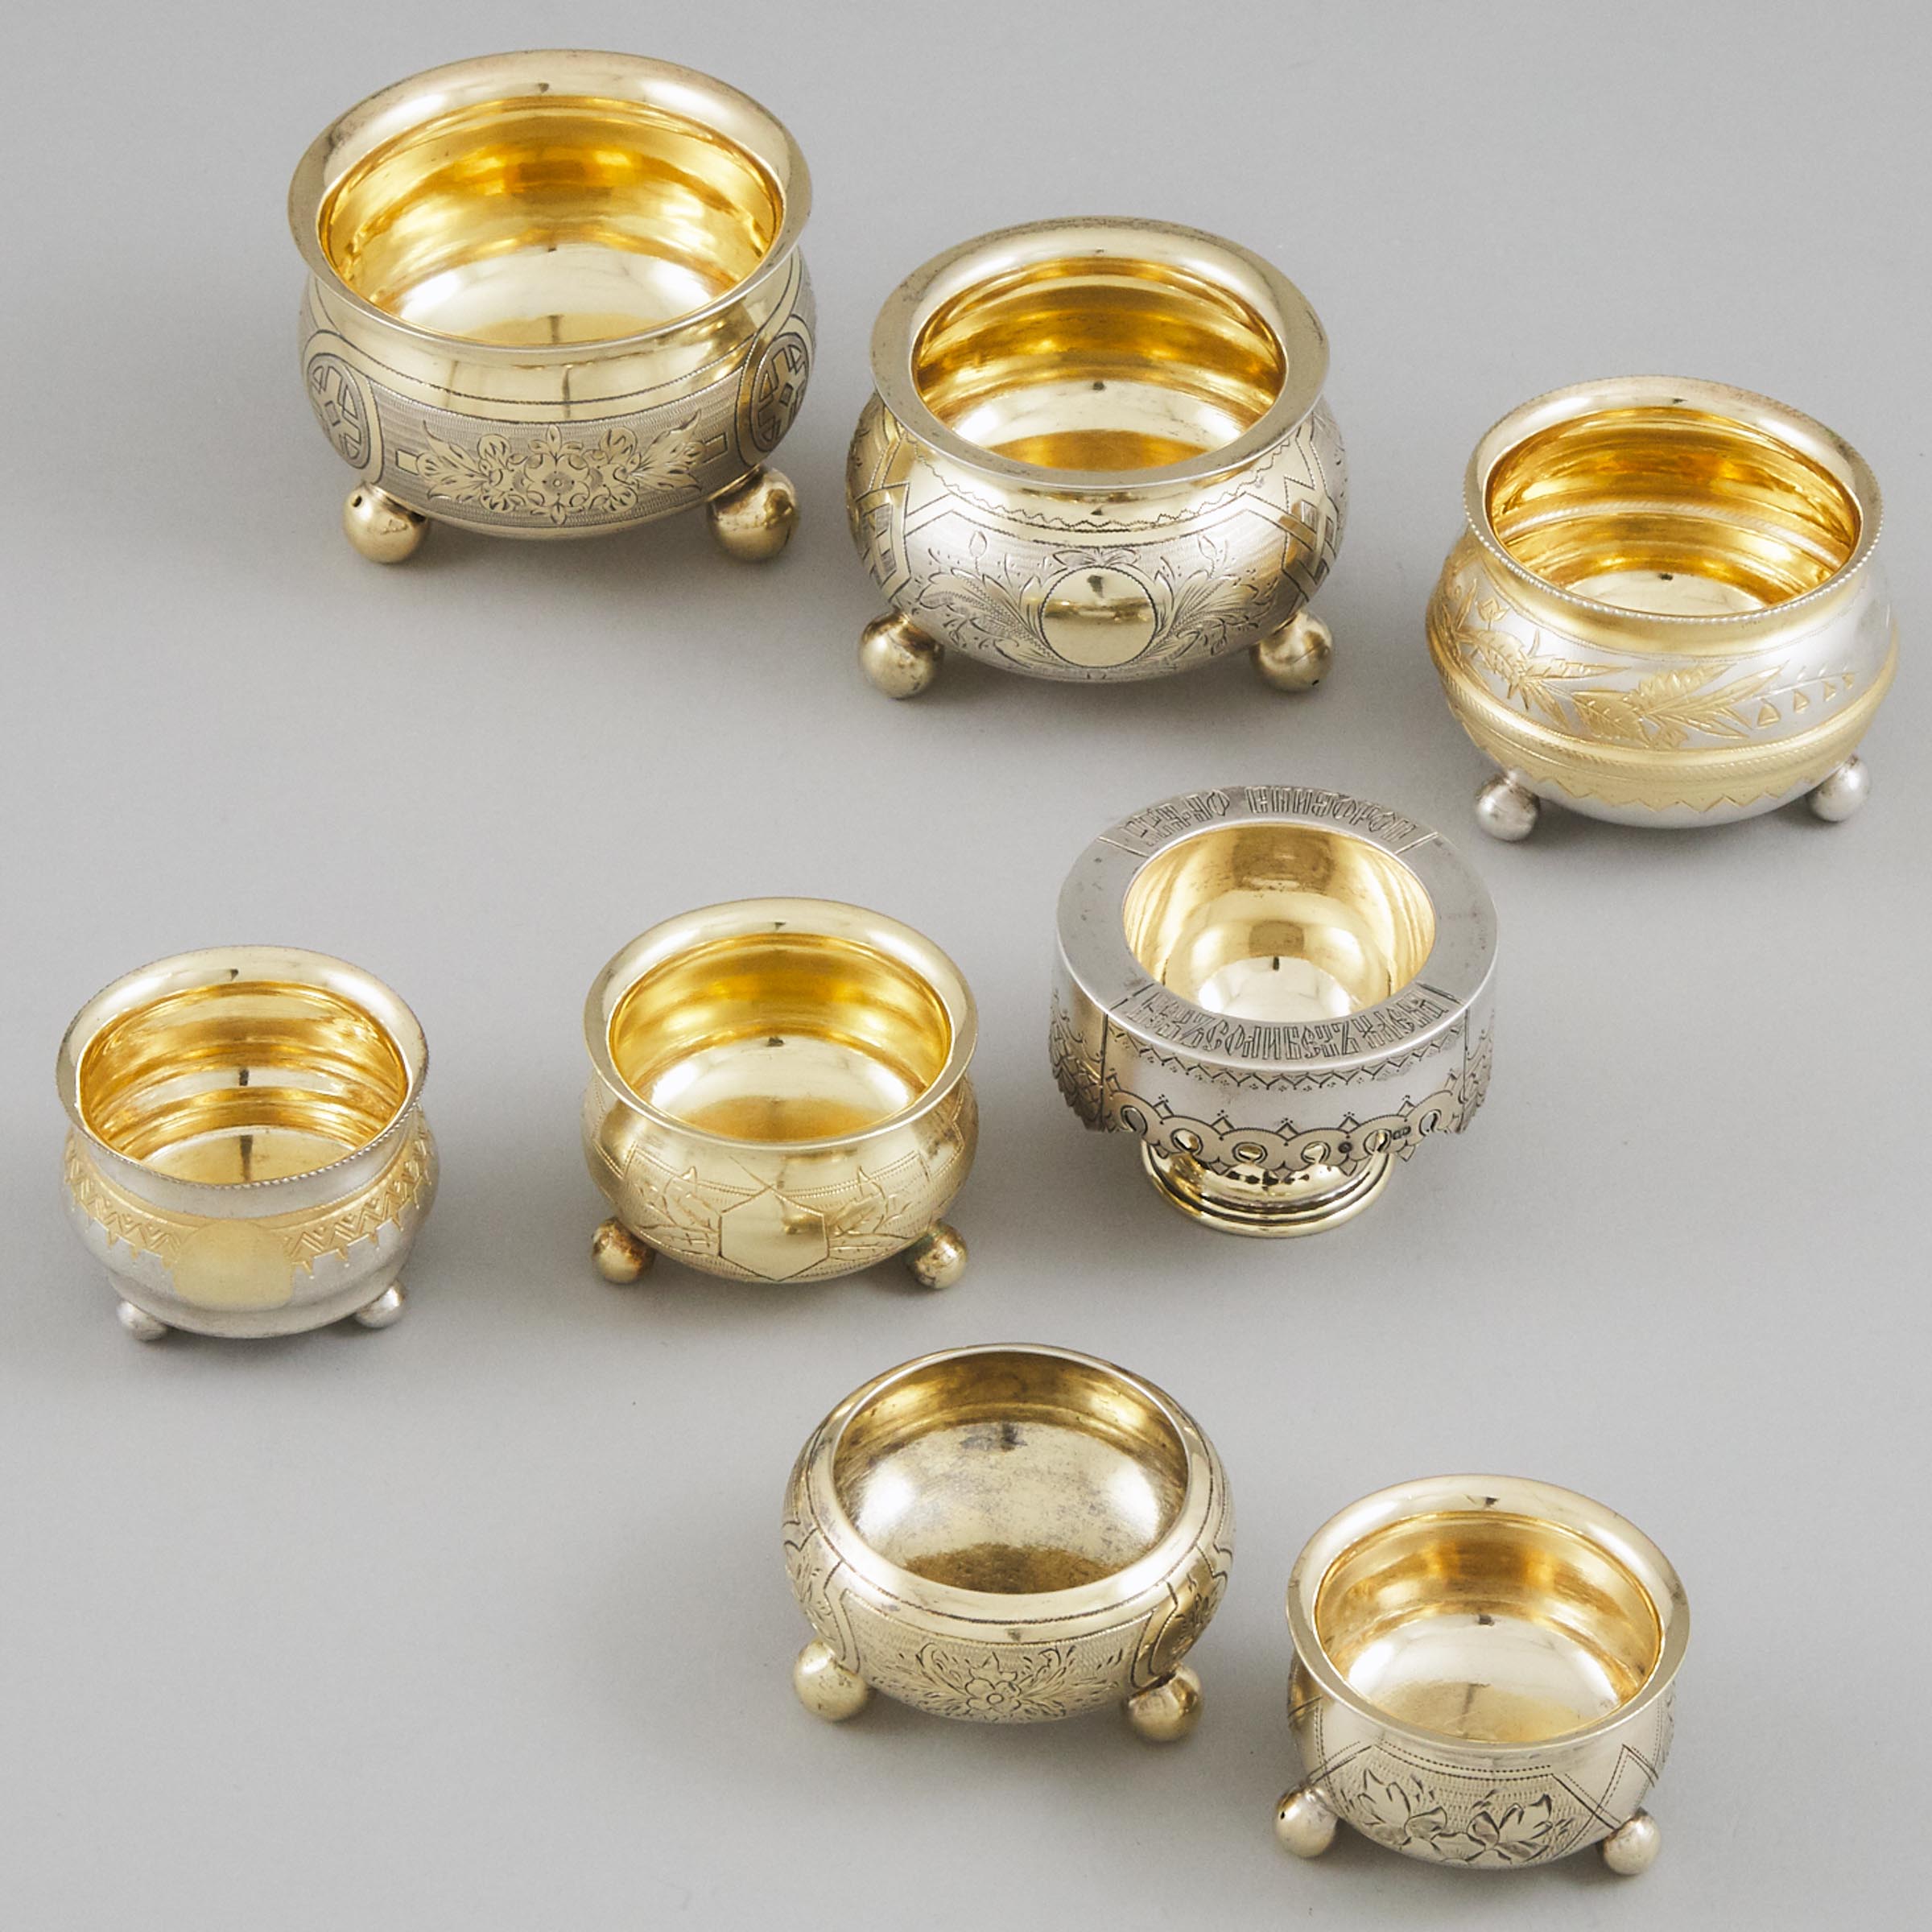 Eight Russian Silver and Silver-Gilt Salt Cellars, late 19th/early 20th century